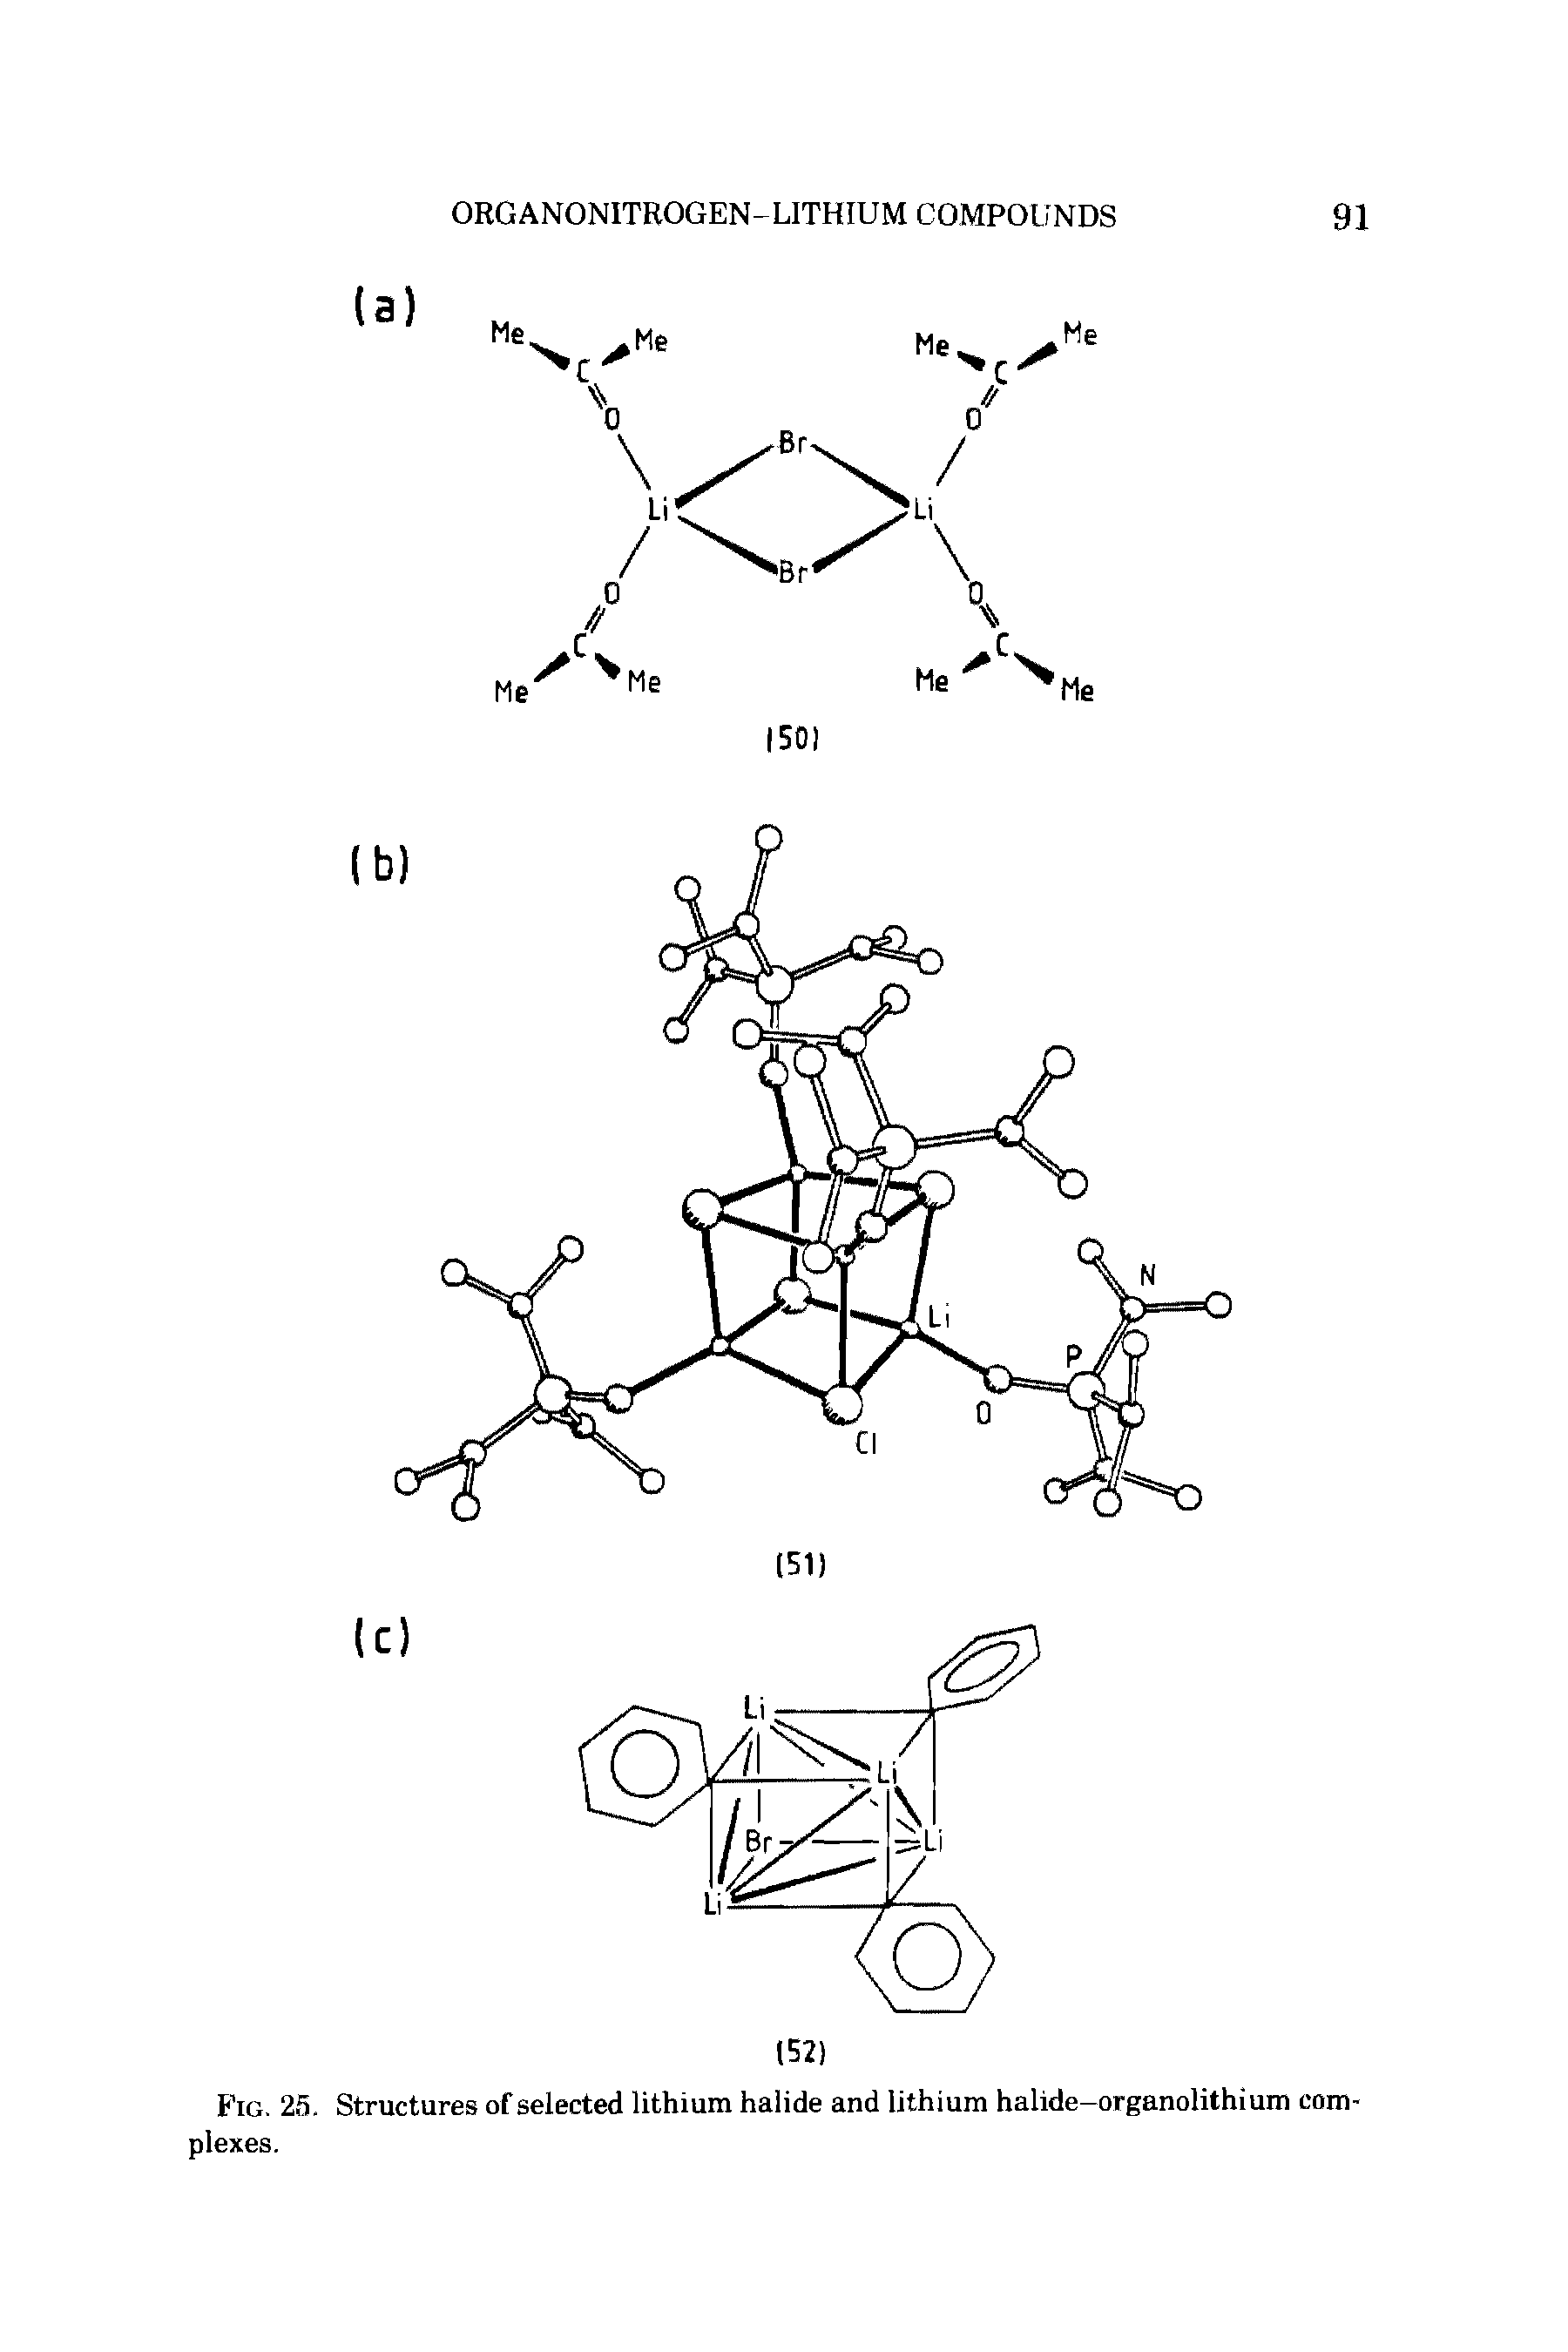 Fig. 25. Structures of selected lithium halide and lithium halide-organolithium complexes.